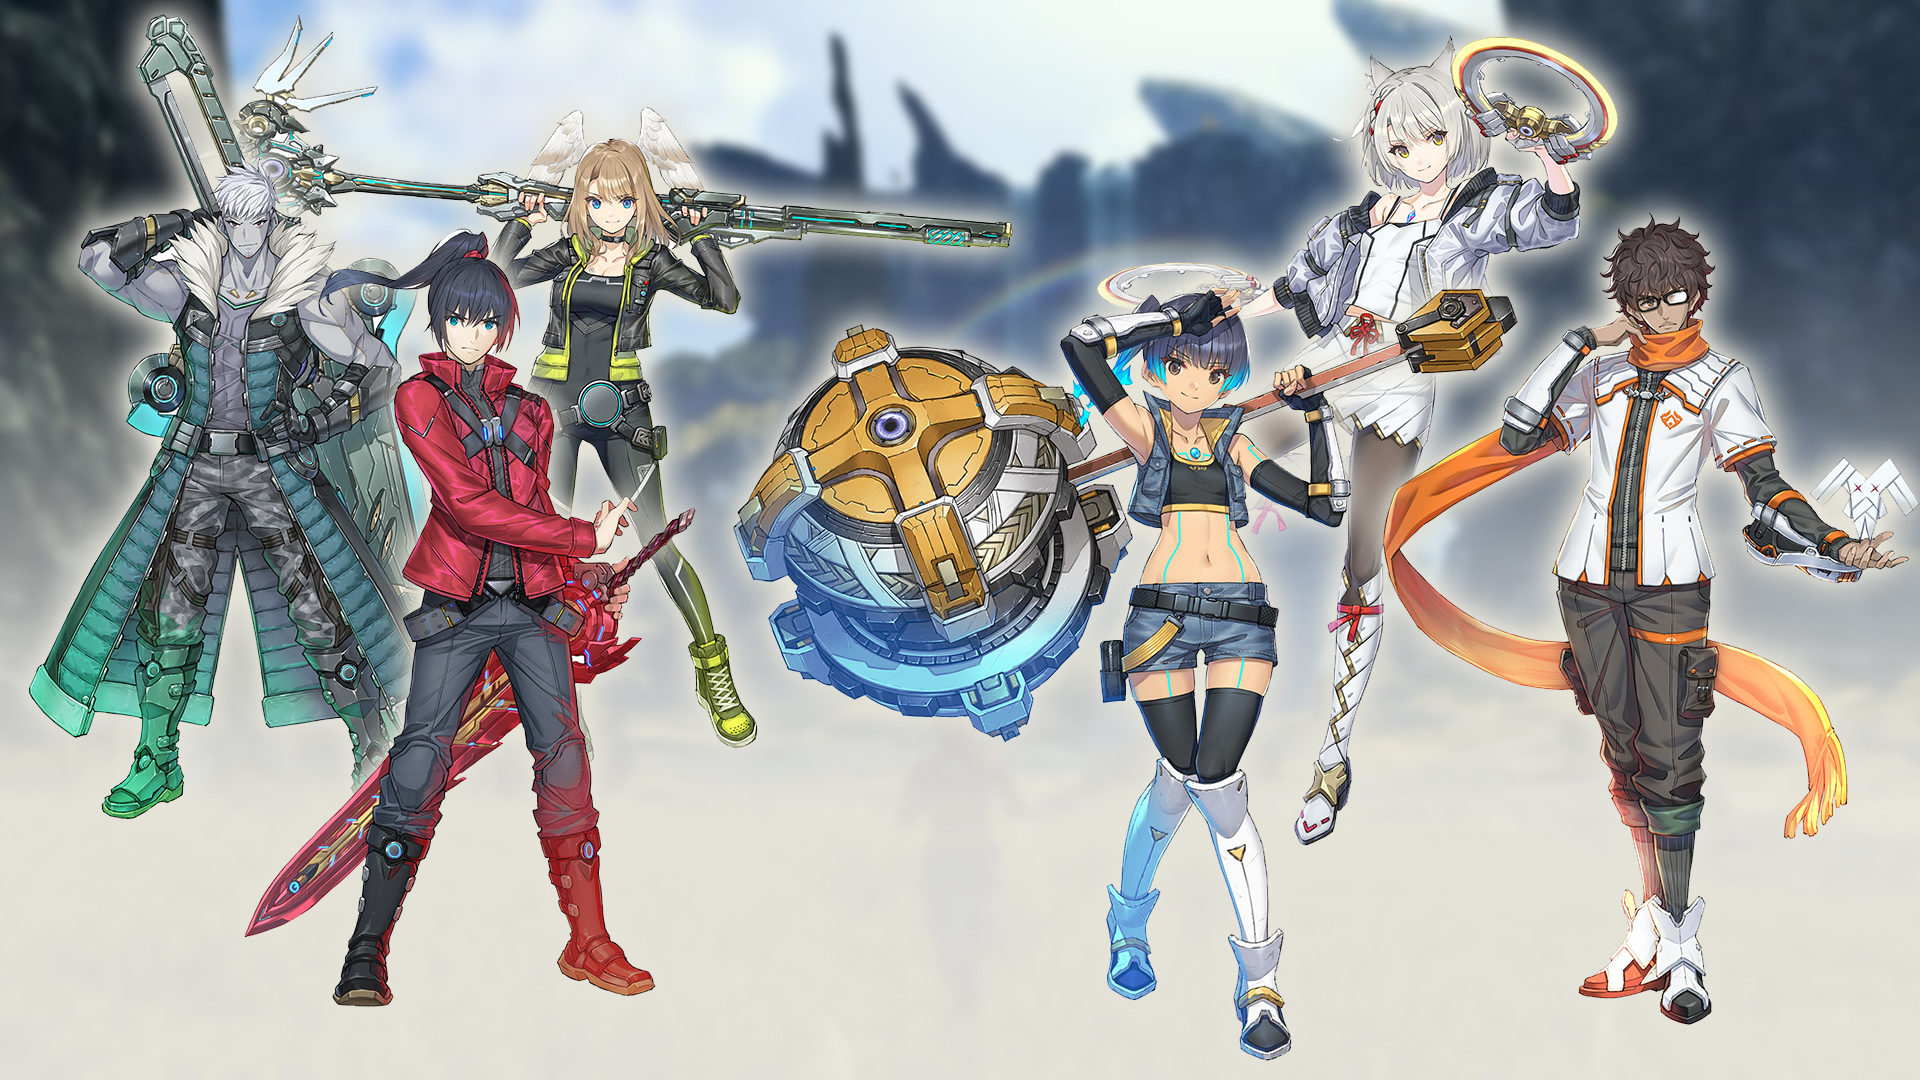 Due to the characters in Xenoblade Chronicles 3 having artwork, I decided  to try my hand at a group shot of the characters. I think it looks pretty  good overall. (I don't